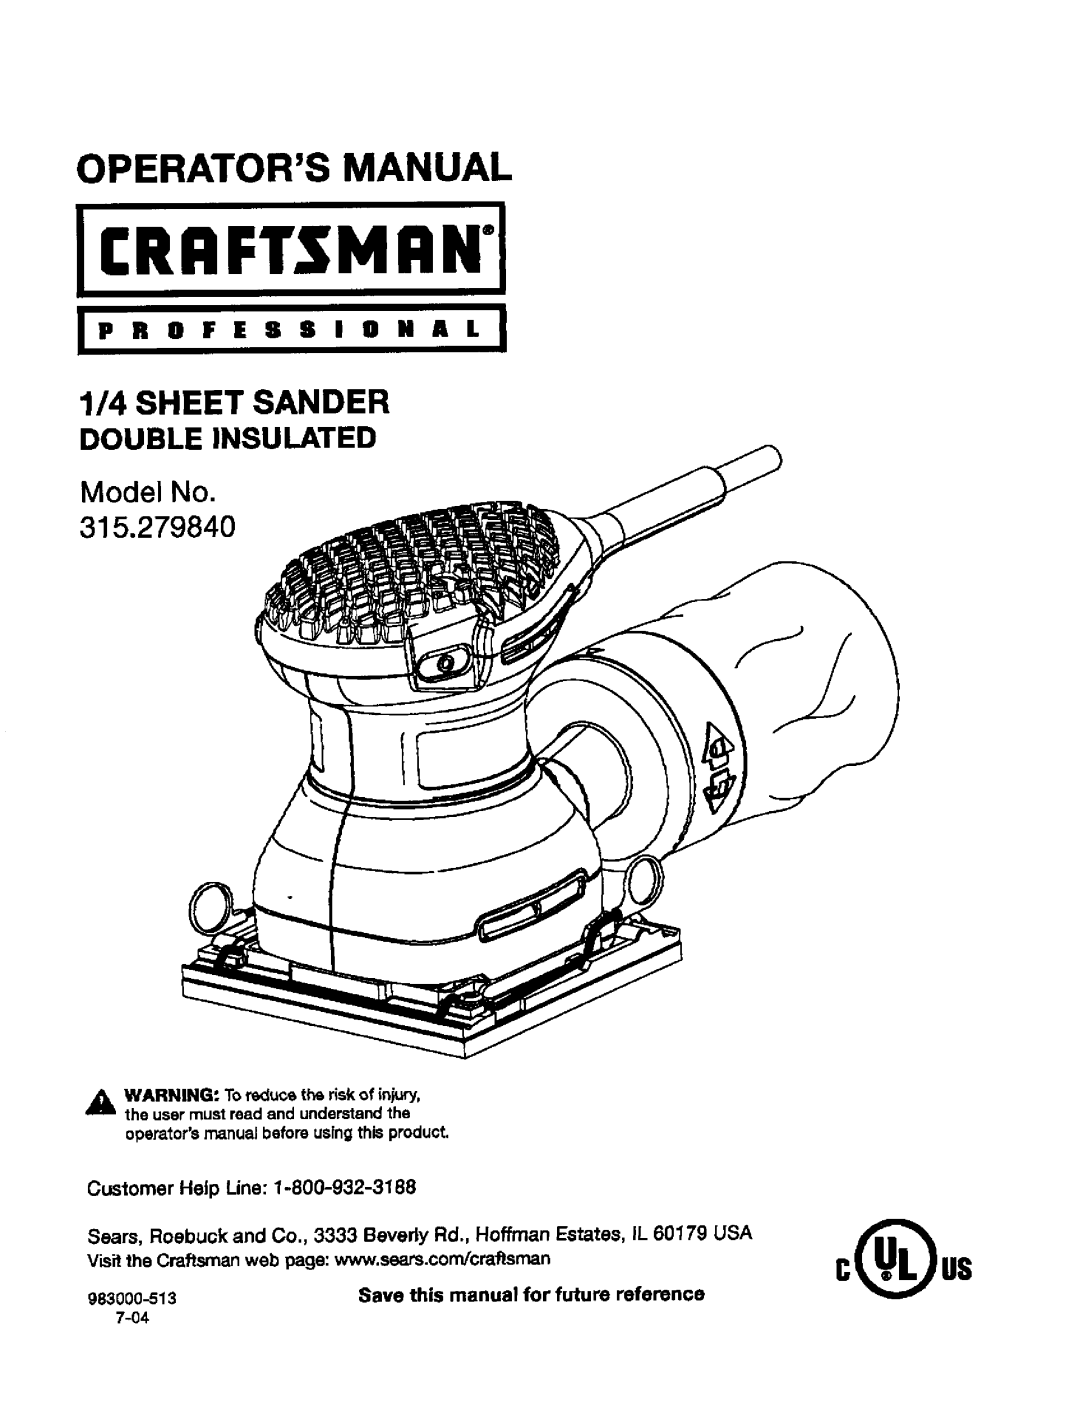 Craftsman 315.27984 manual Operators Manual, 1/4 SHEET SANDER DOUBLE INSULATED, Model No, iPR OFESSI ONAL 